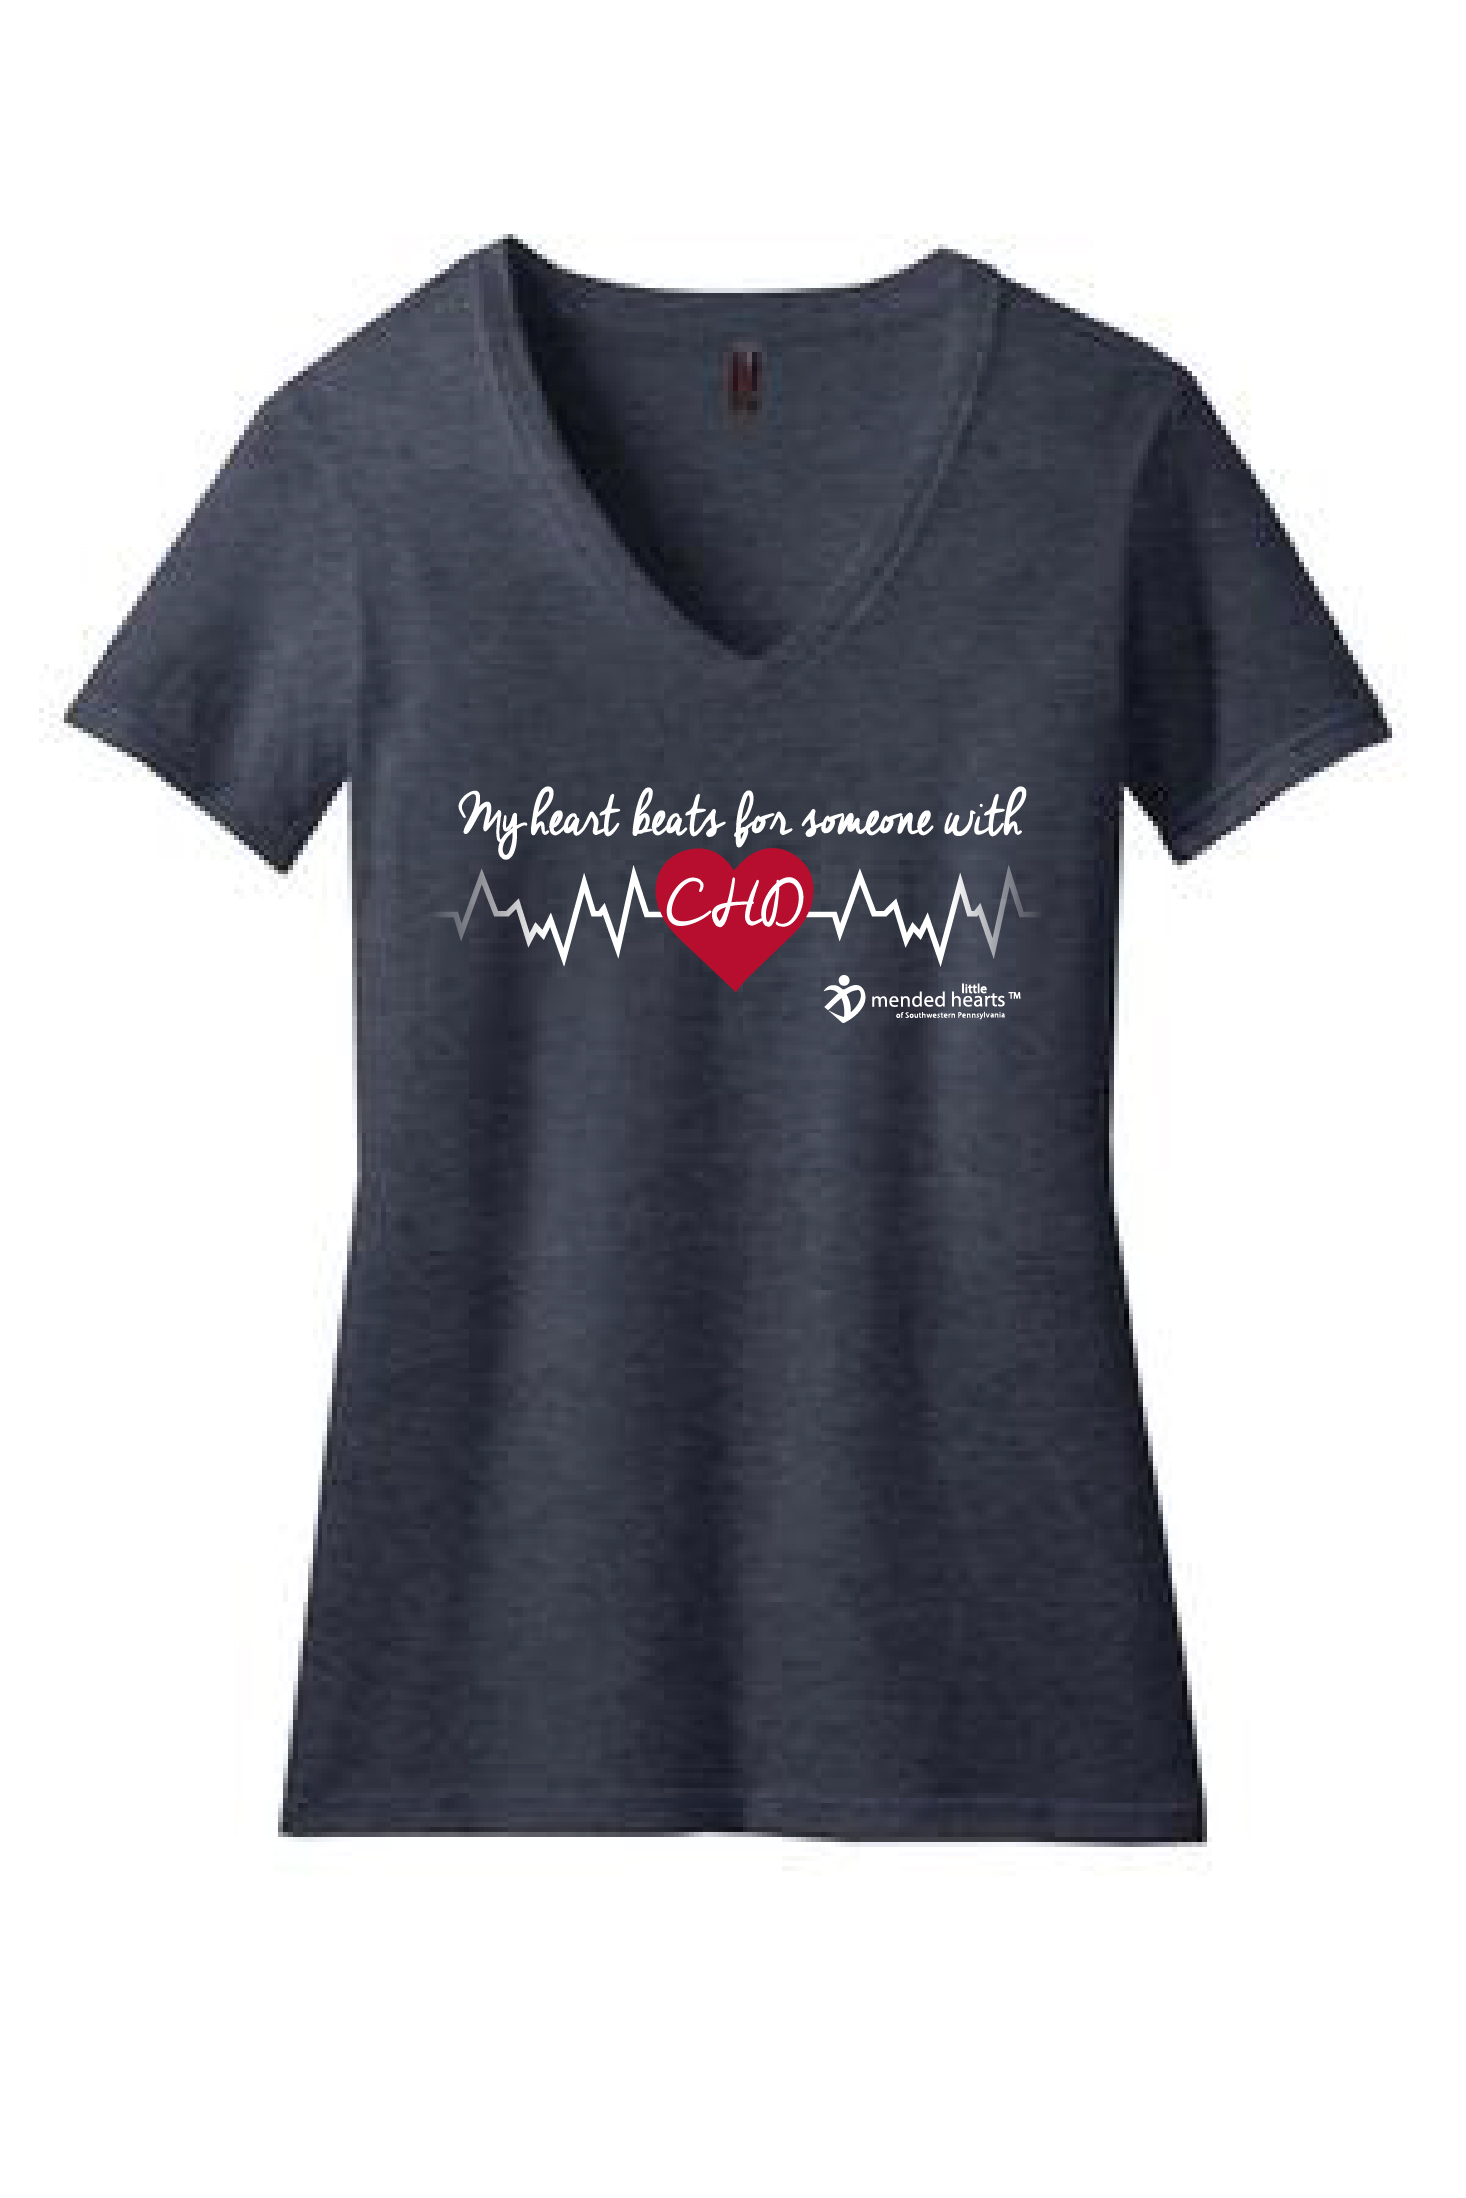 My Heart Beats for Someone with CHD, Ladies’ V-Neck, Available in Multiple Colors!